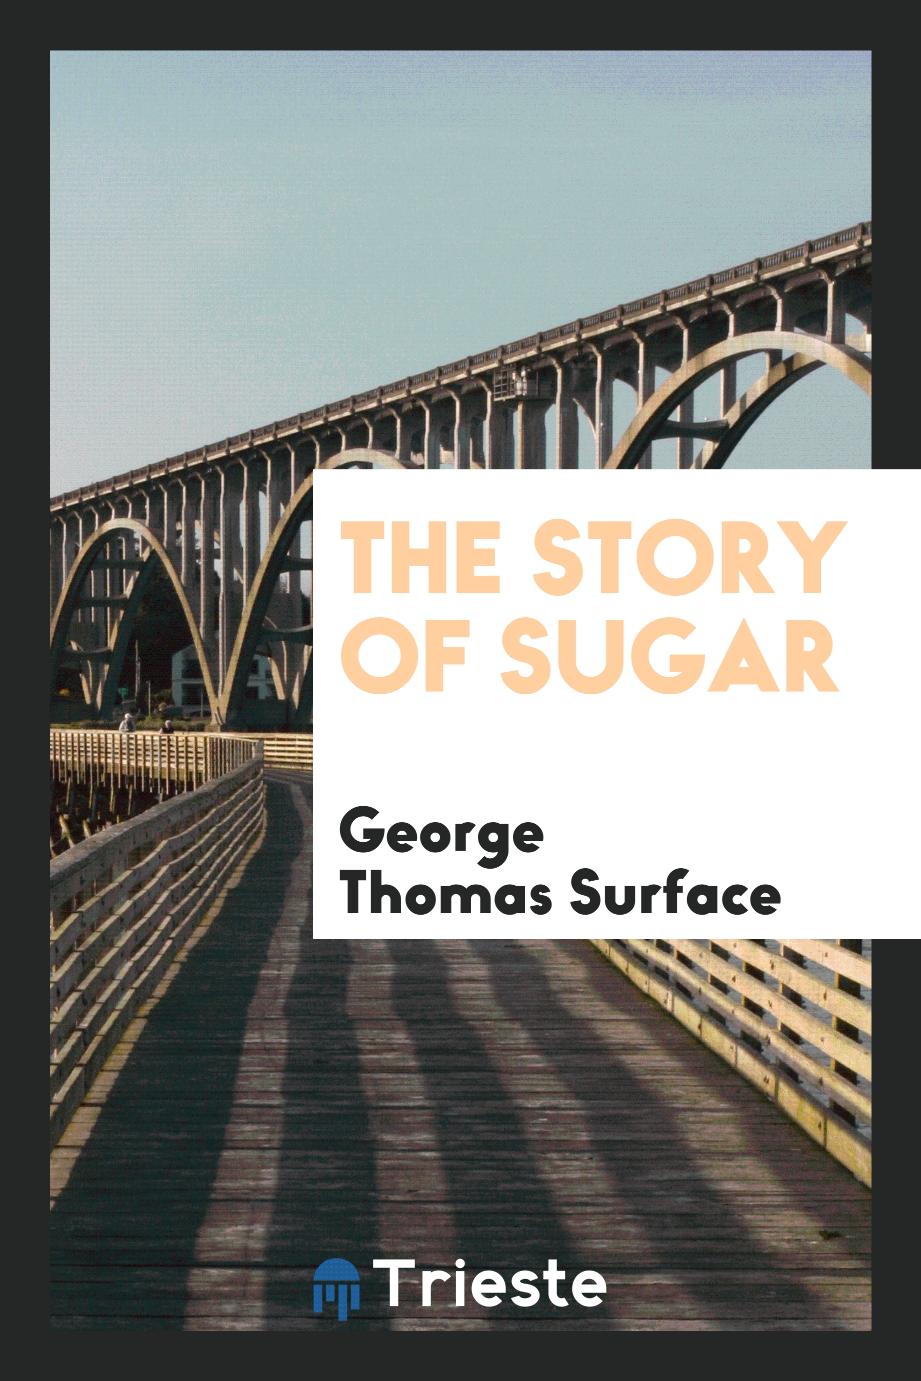 The story of sugar